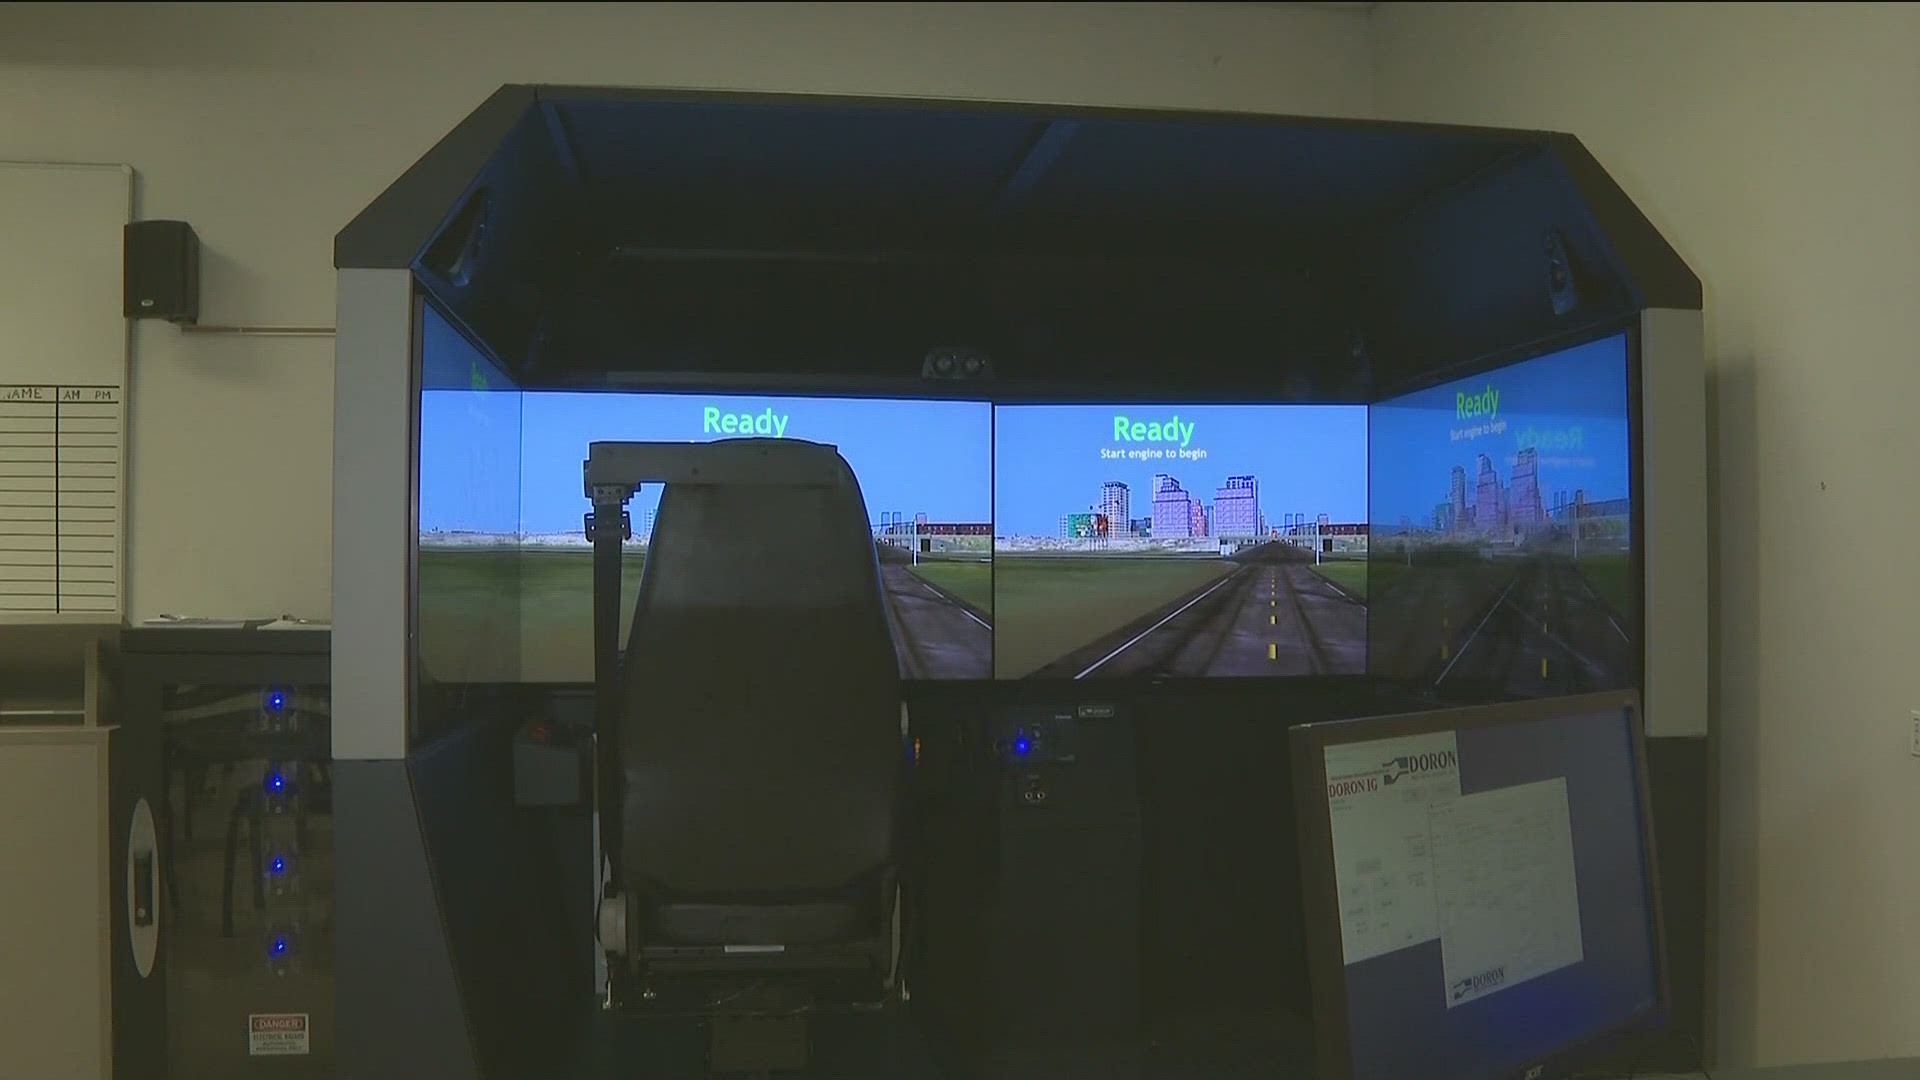 The school district is now using two state-of-the-art simulators to train drivers in real-world scenarios.